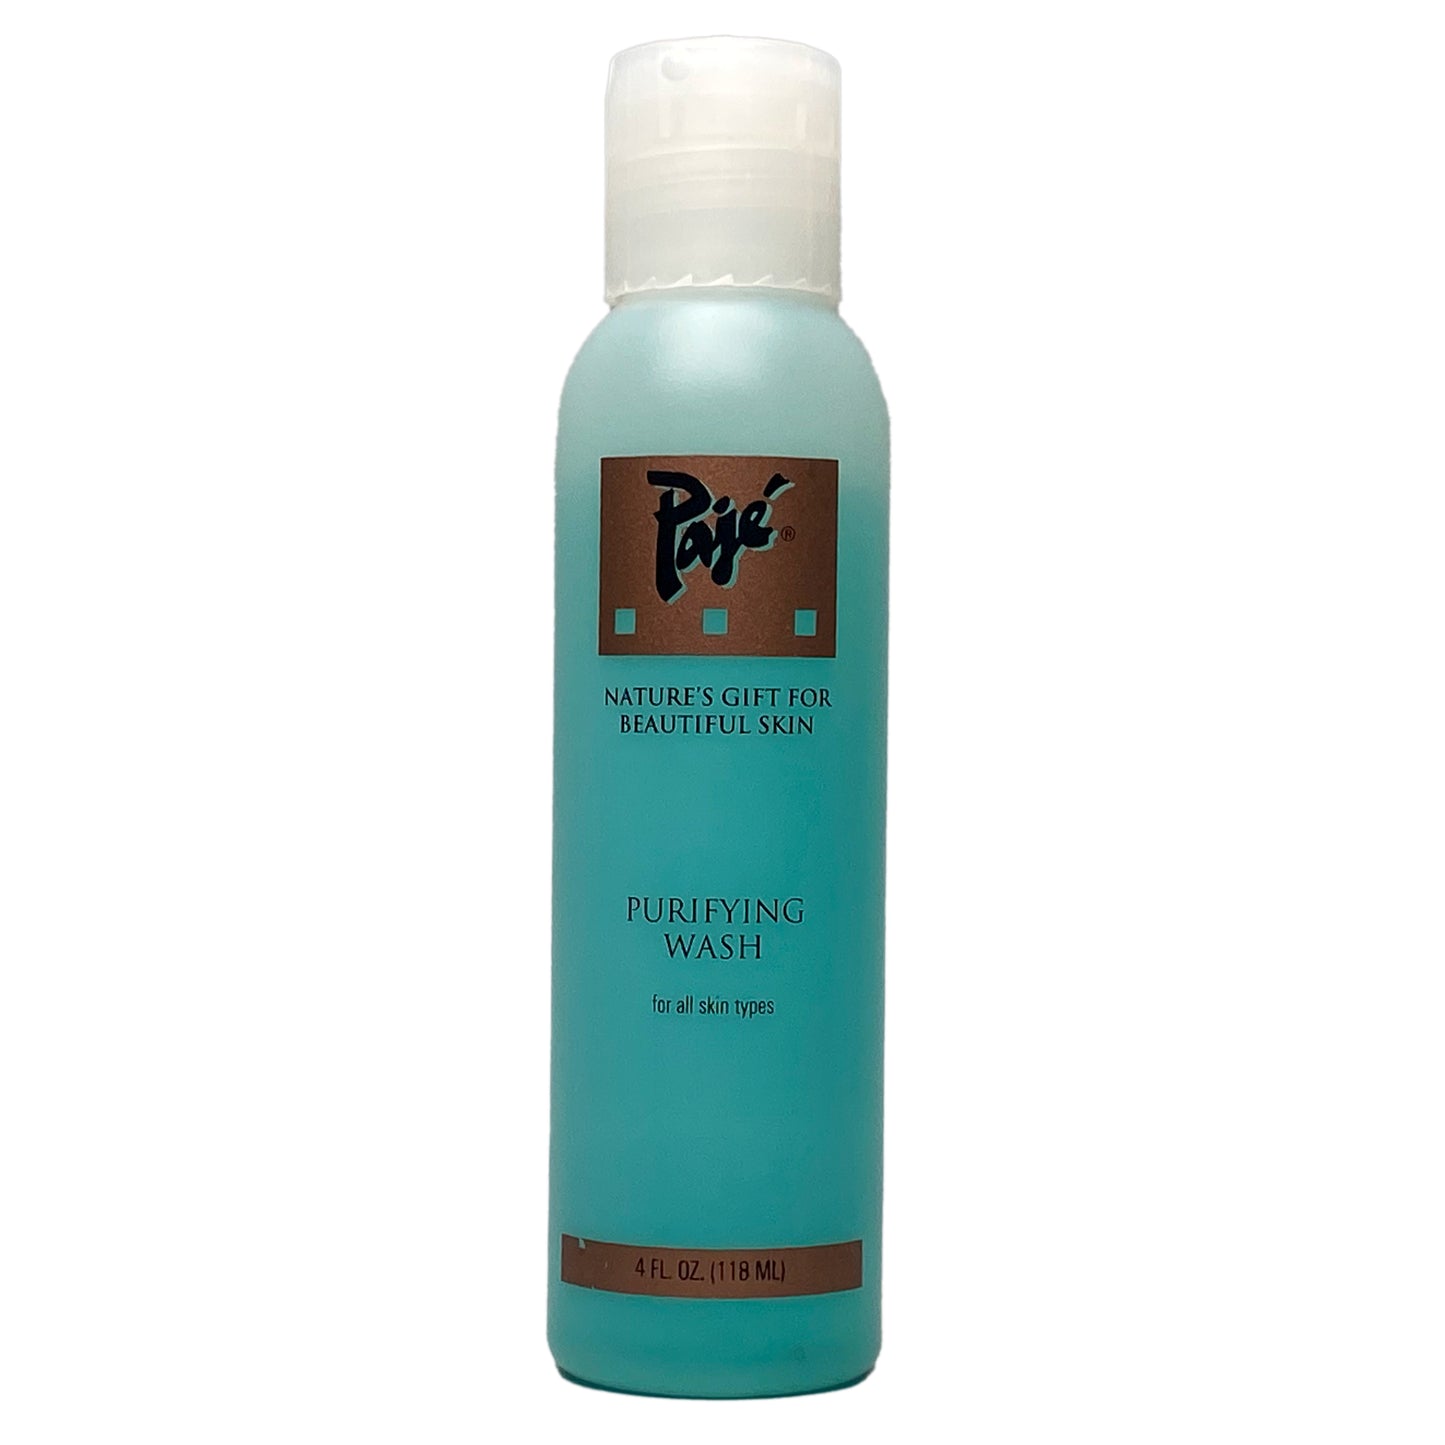 Pajé Purifying Wash is a surprising twist on cleansing. Made possible by natural clarifiers that dissolve makeup, residue, and irritants, and unclog pores. This super-foaming wash is the perfect cleansing product for those who like to use soap and water but wish to avoid the dehydrating effects. pH balanced